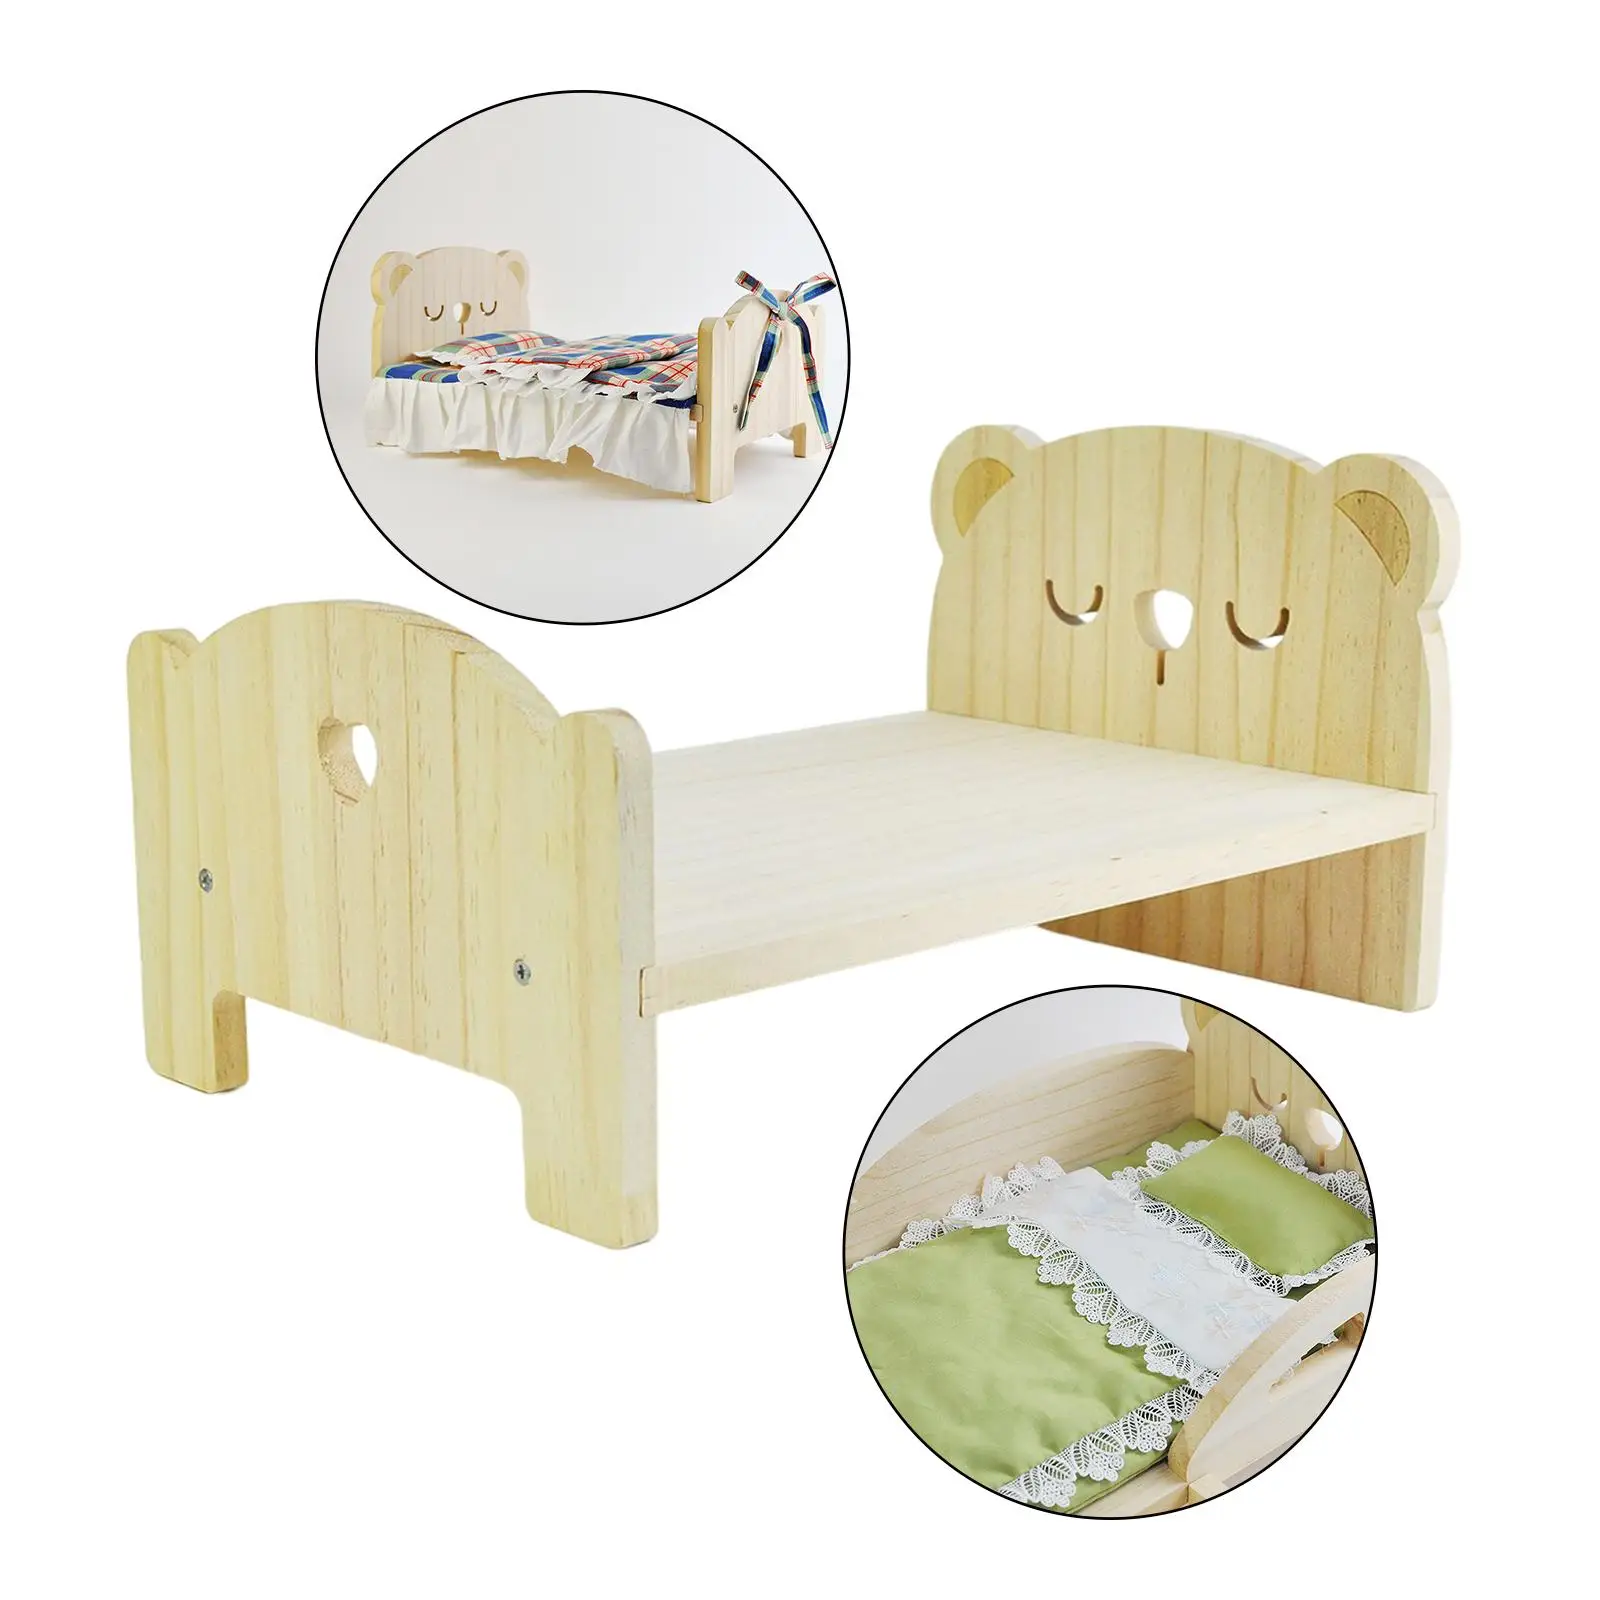 Miniature Doll House Furniture 1:6 Scale Wood for Dolls Life Scene Props DIY Fitments